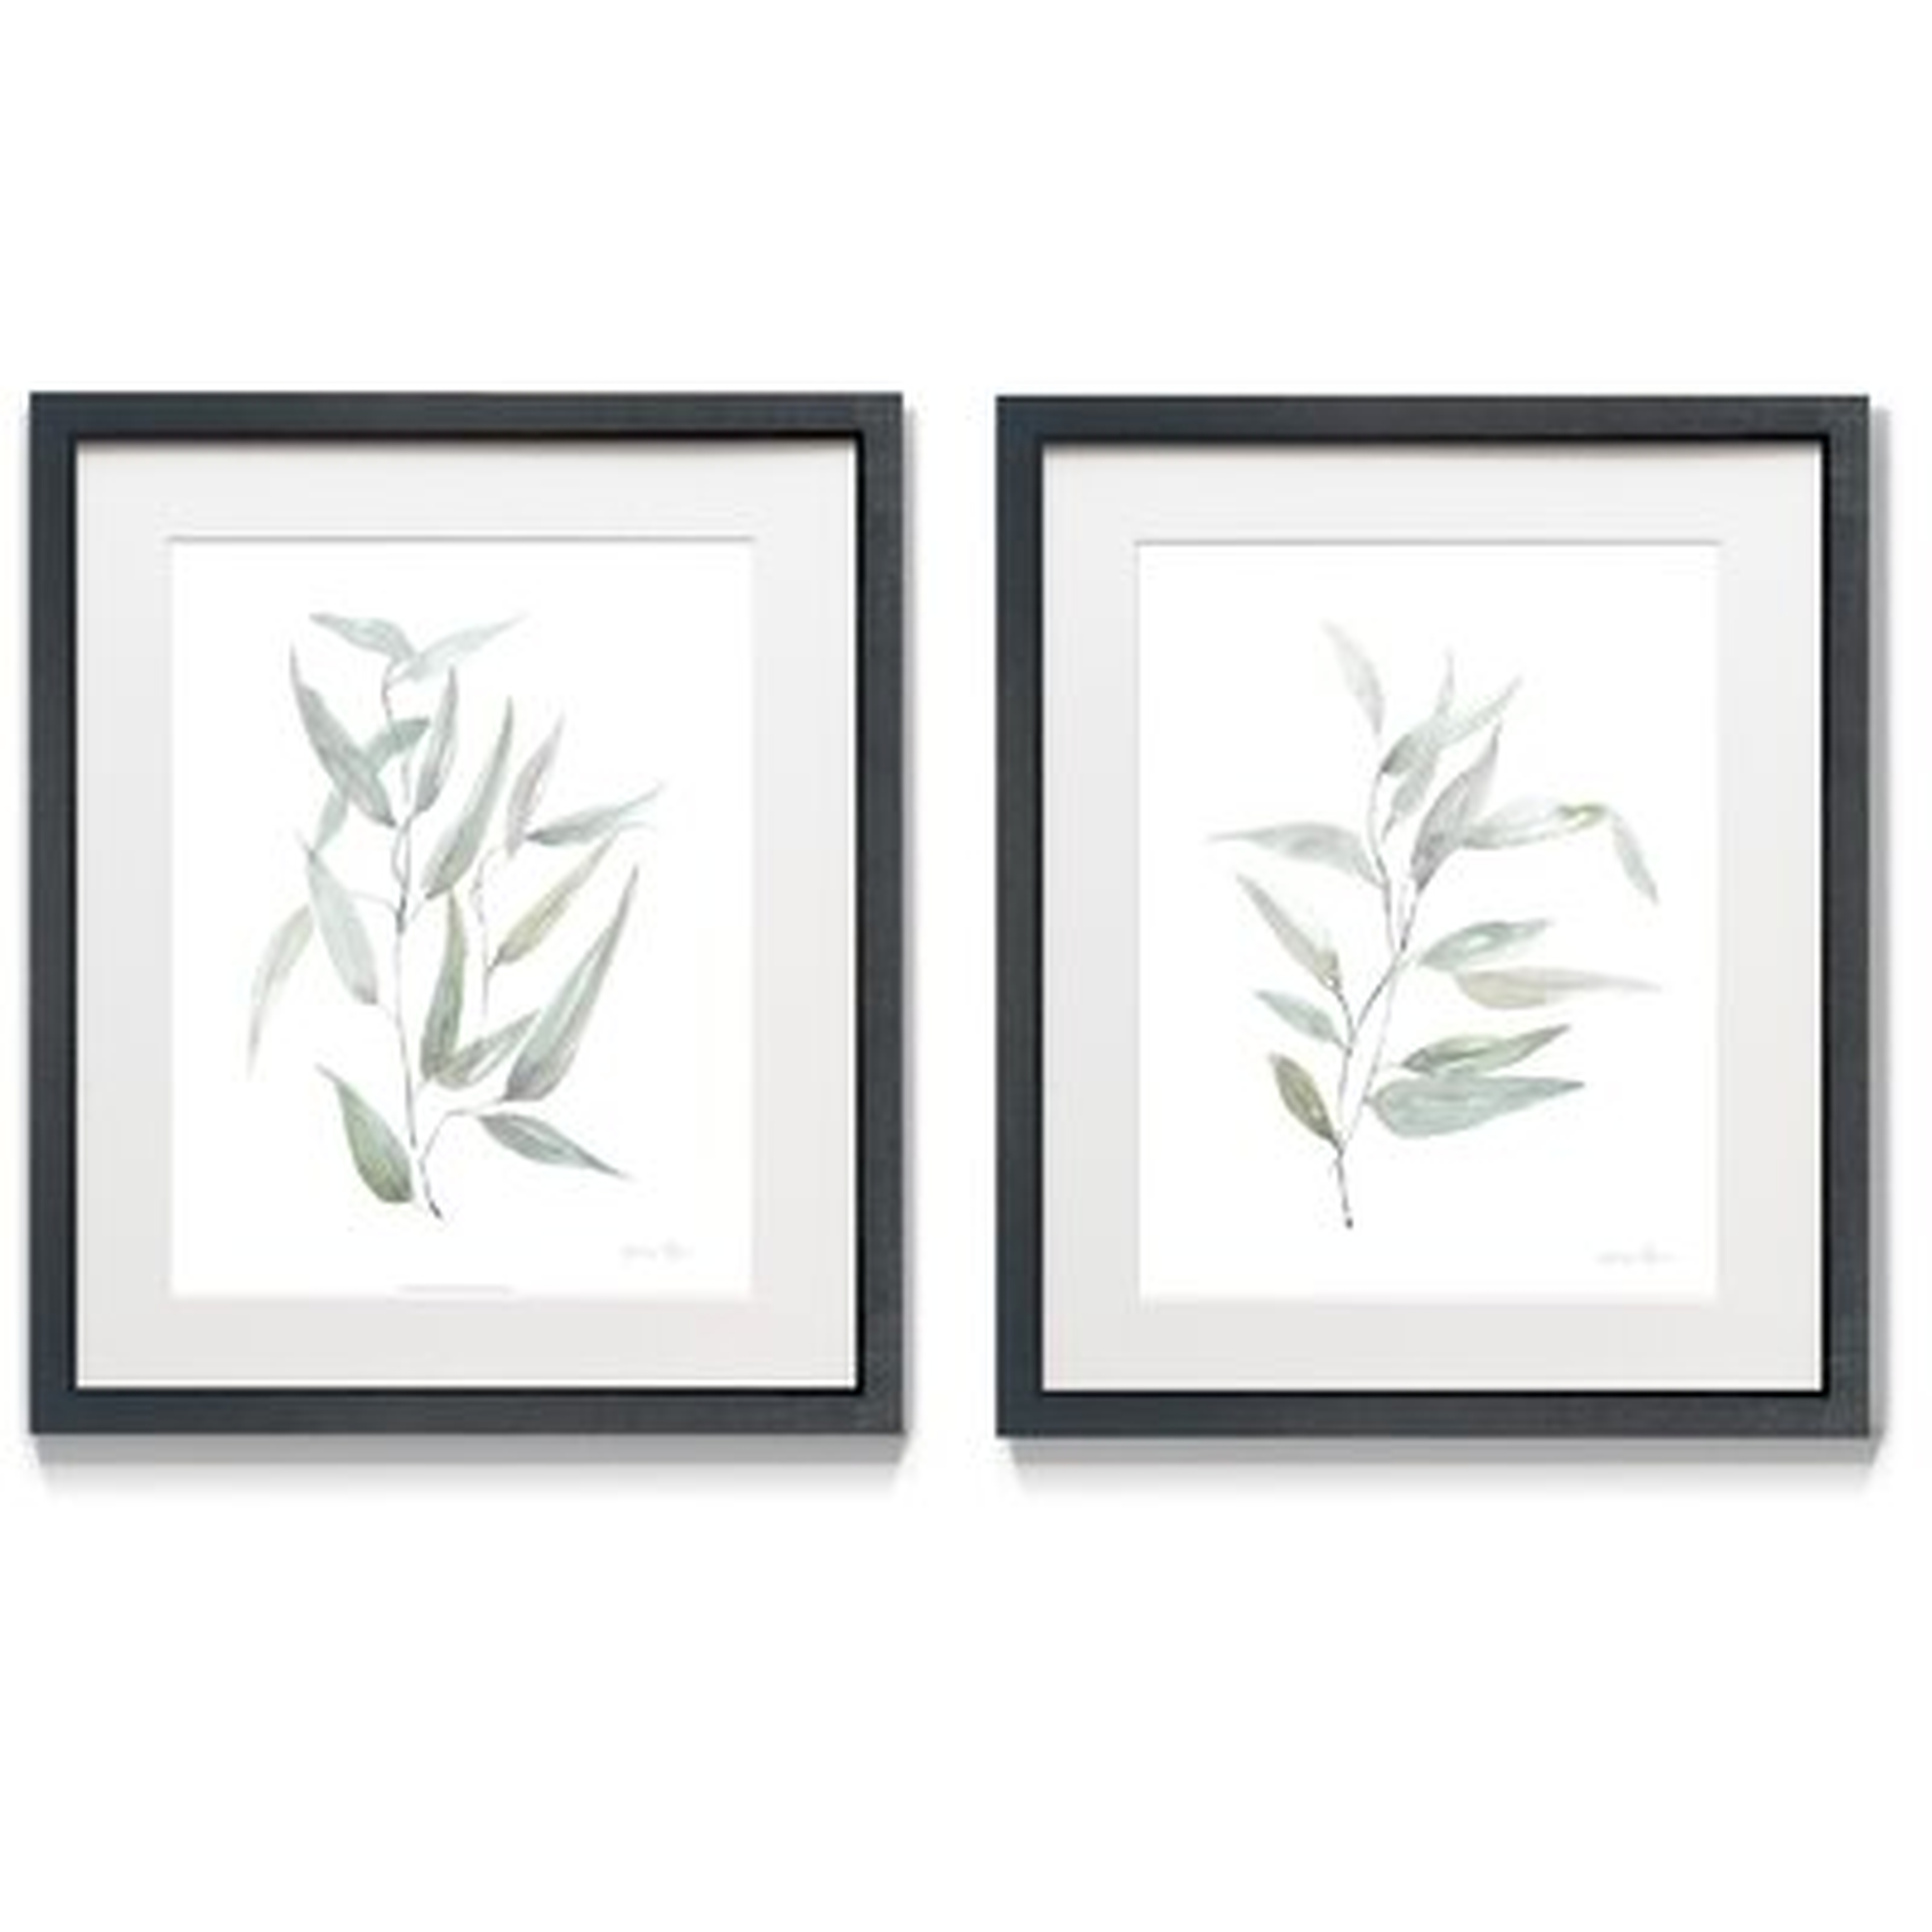 Ethereral II - 2 Piece Picture Frame Print Set - Wayfair